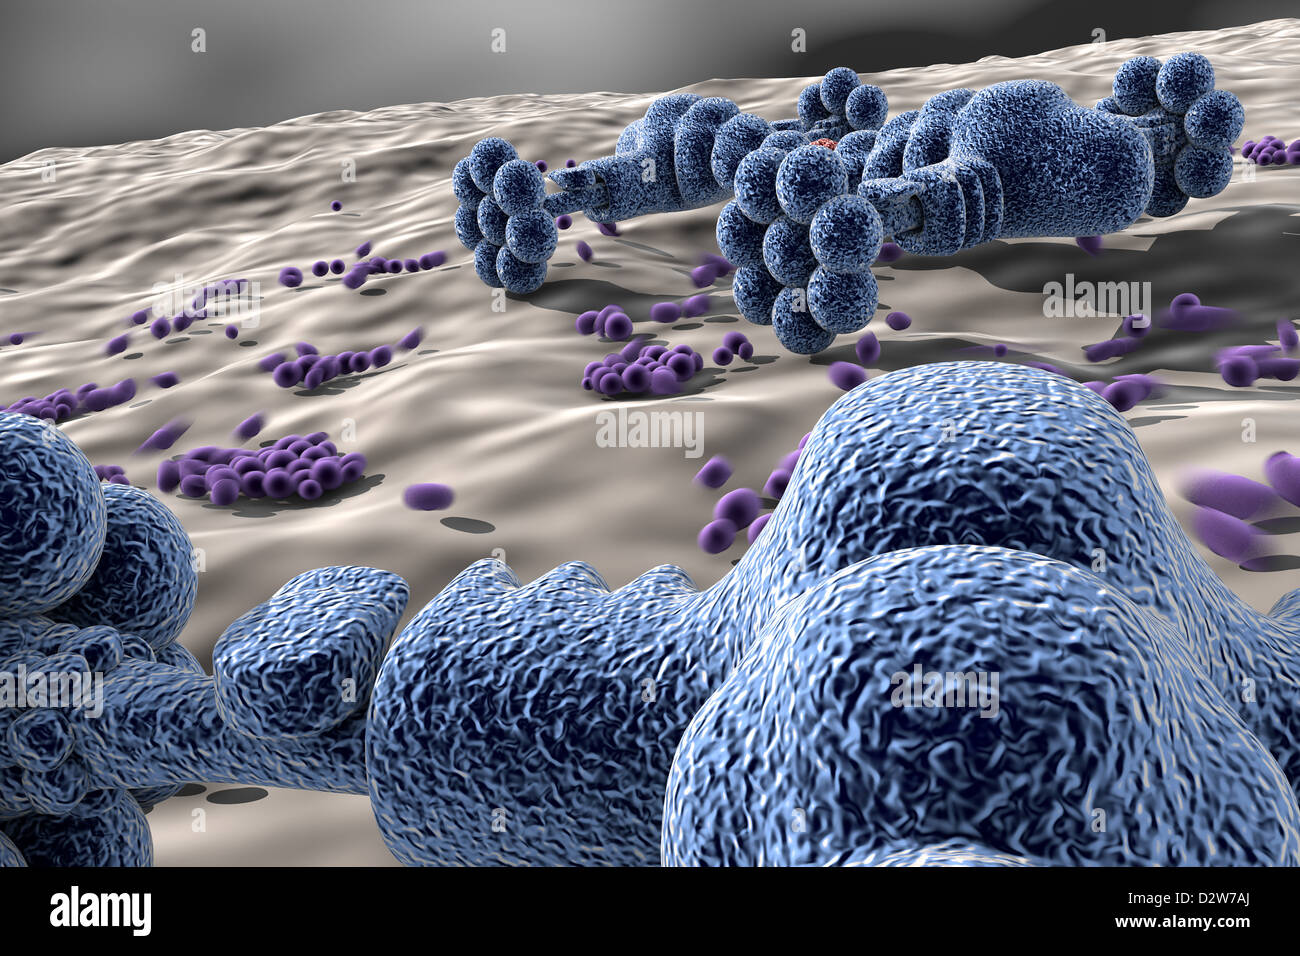 nanotechnology in science and medicine Stock Photo